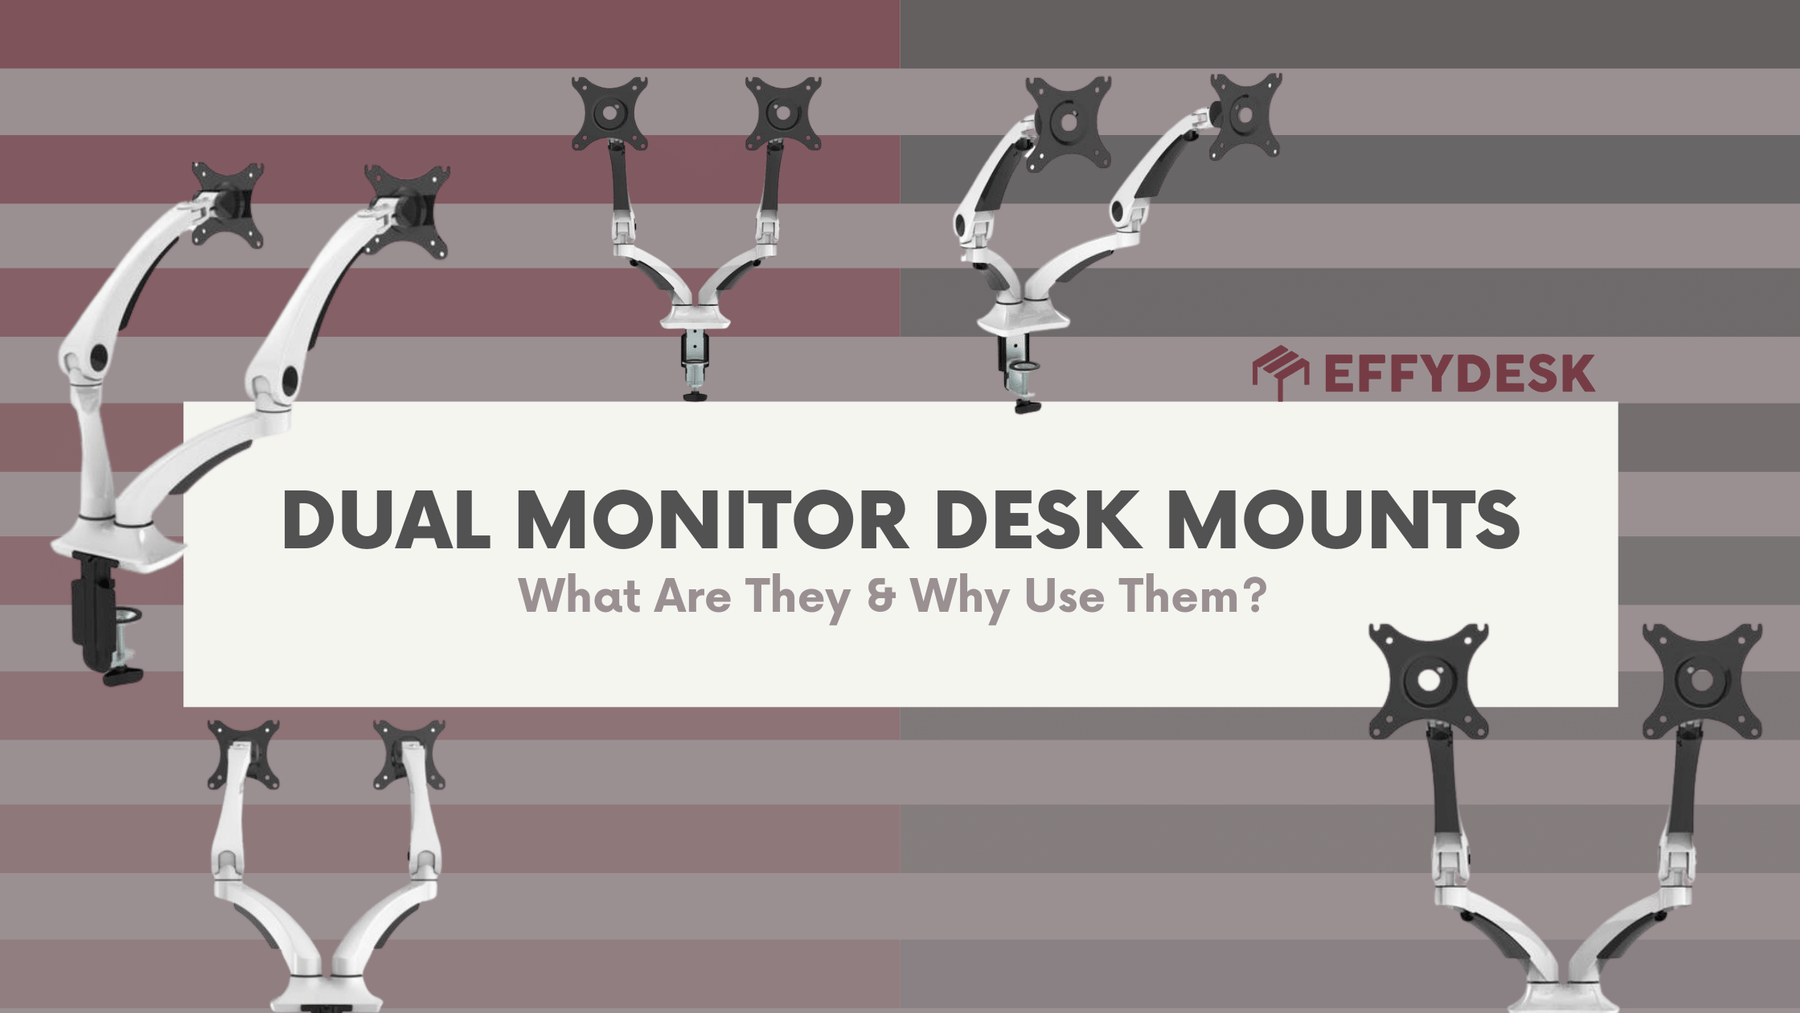 Dual Monitor Desk Mounts - What Are They and Why Use Them?